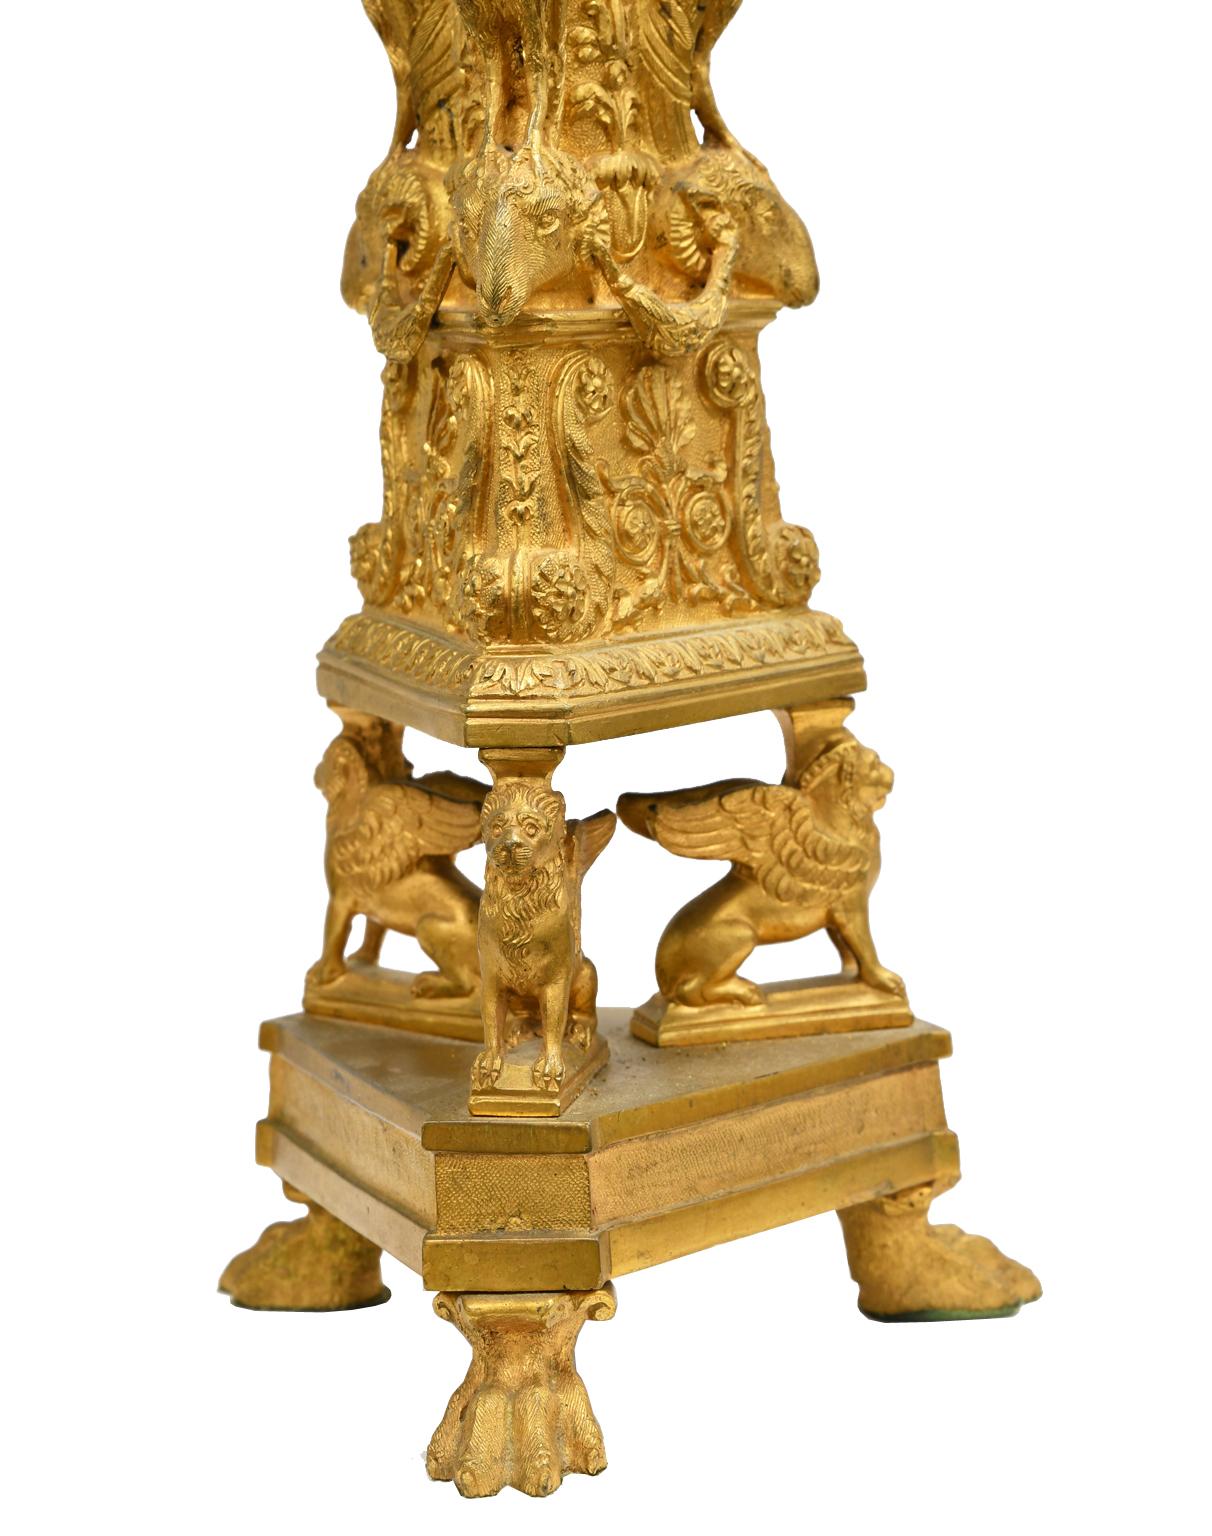 19th Century Pair of Italian Neoclassical Gilded Candlesticks Based on Design by Piranesi